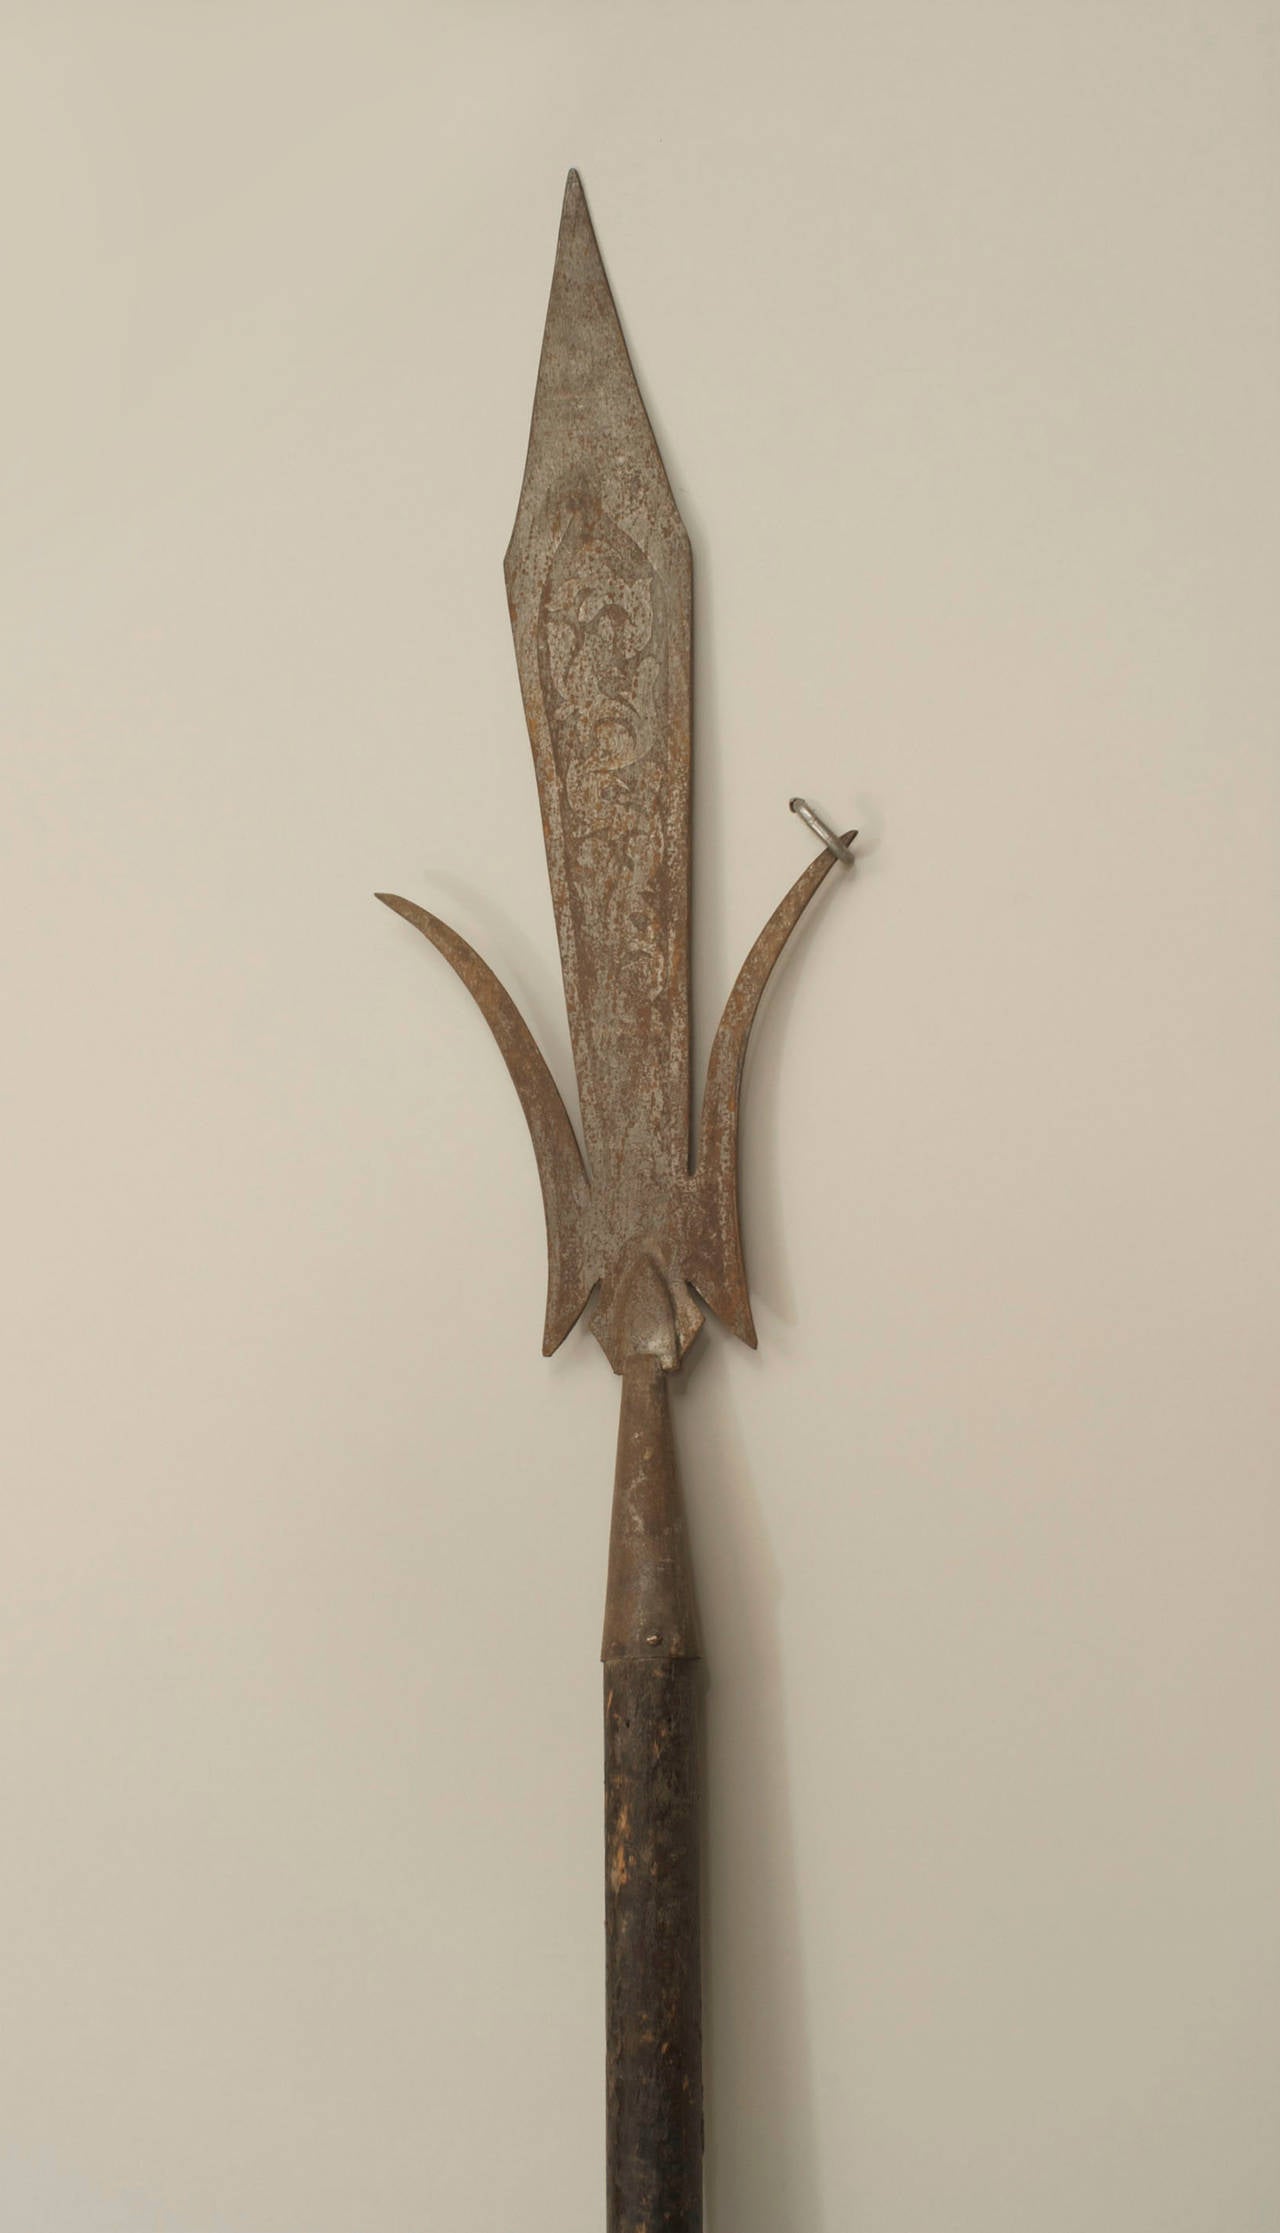 English Renaissance-style spear with simple wooden shaft and etched 24¬Ω-inch three segment iron blade.
